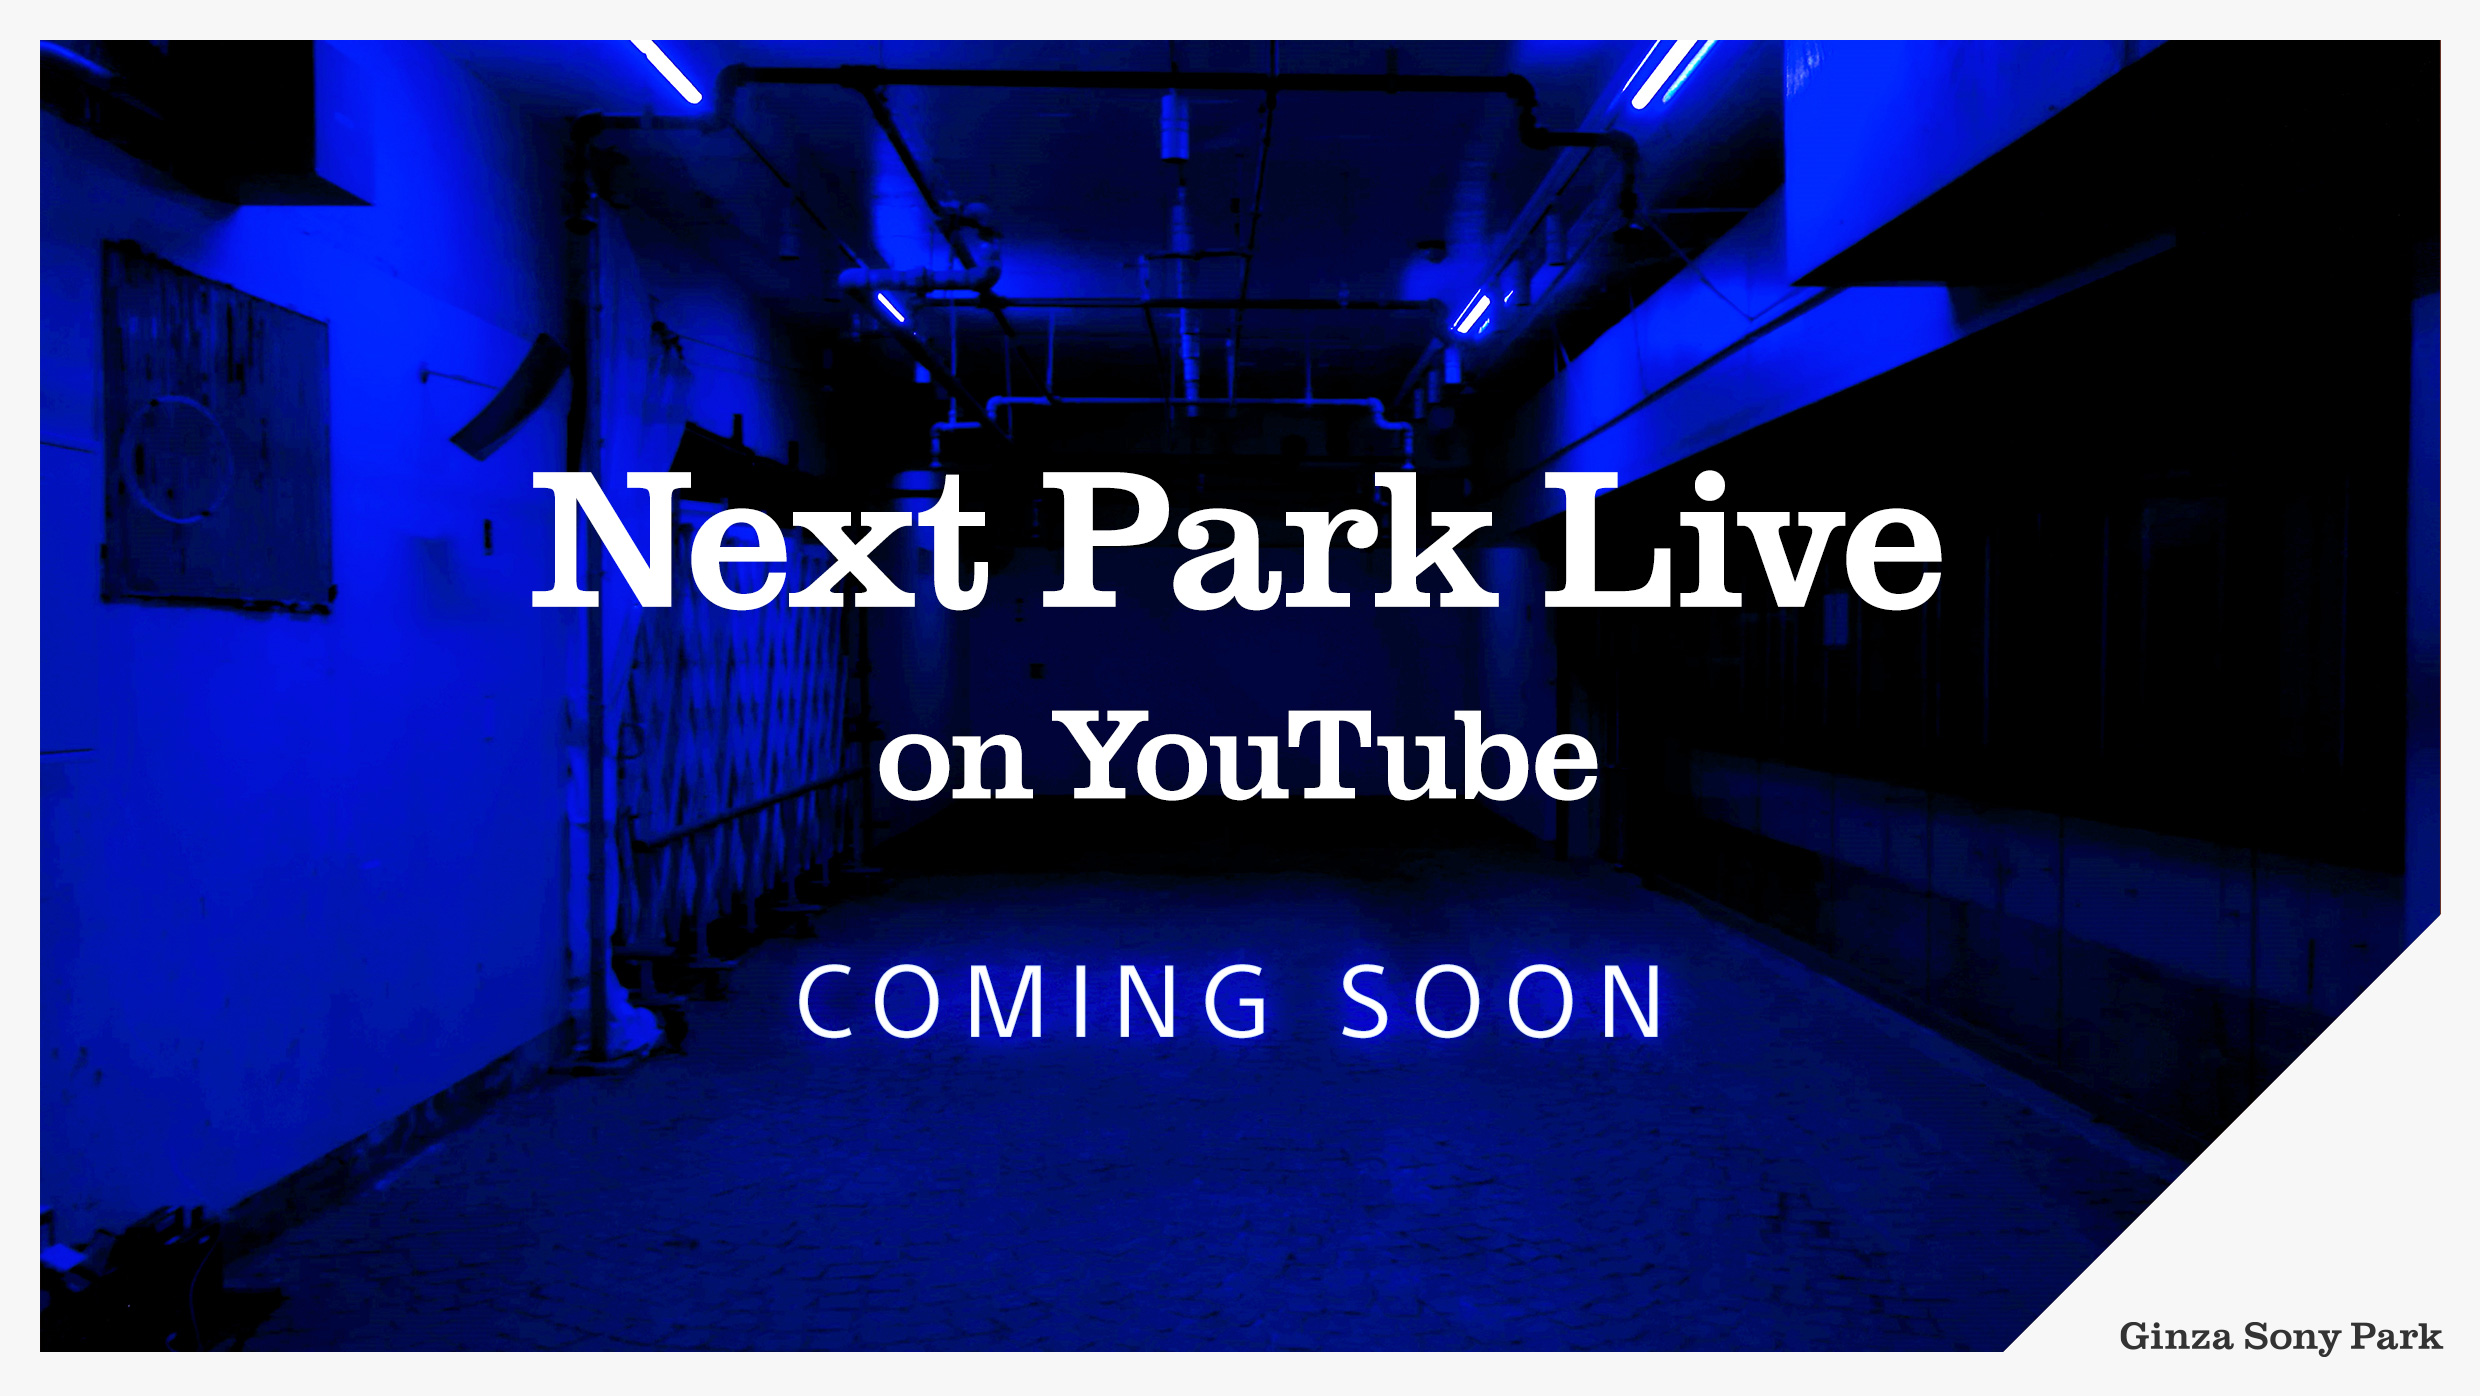 Next Park Live on YouTube COMING SOON